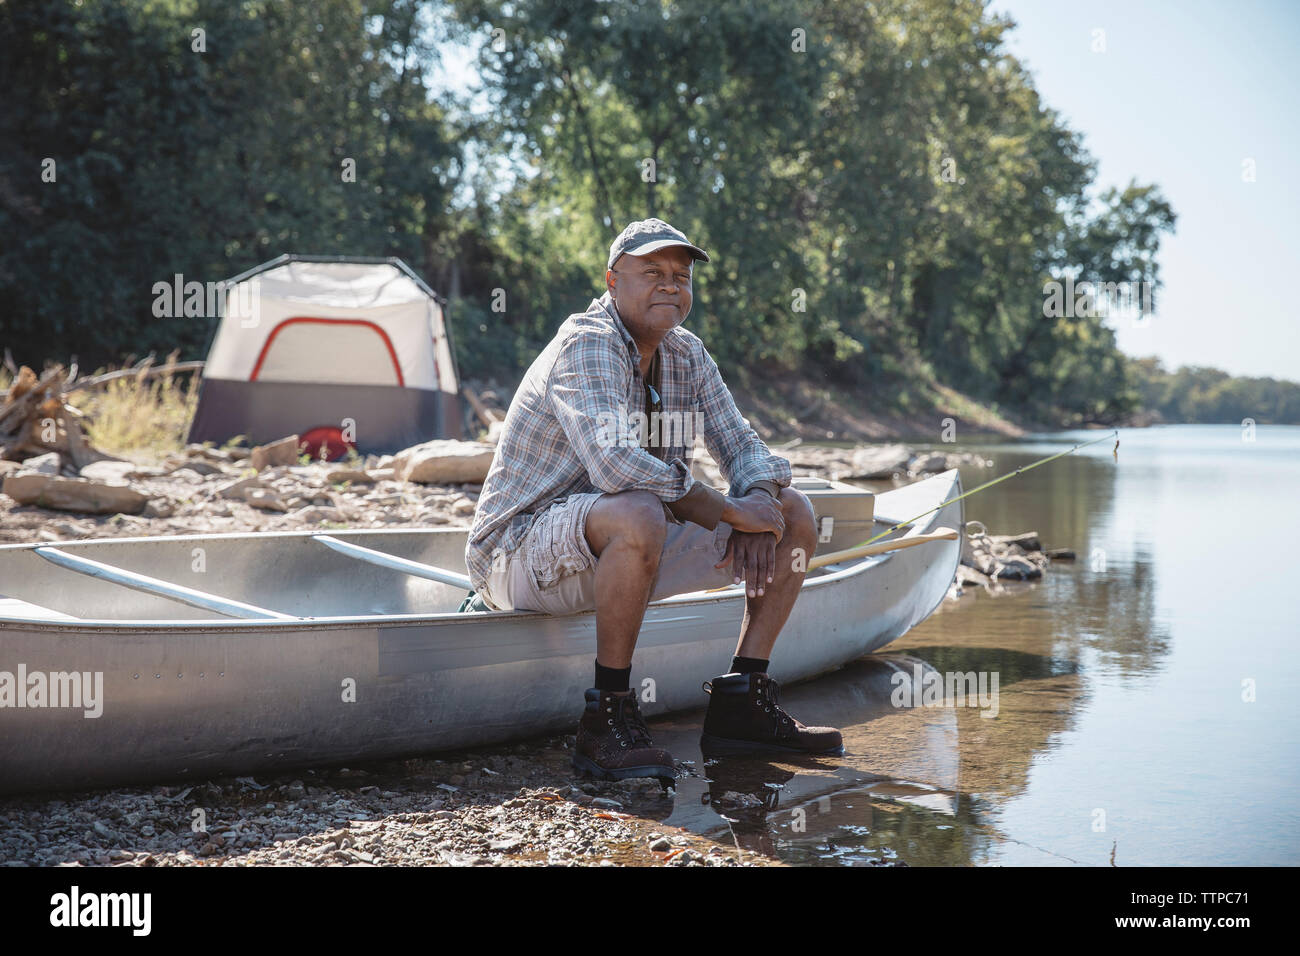 Portrait of man sitting on boat at lakeshore Stock Photo